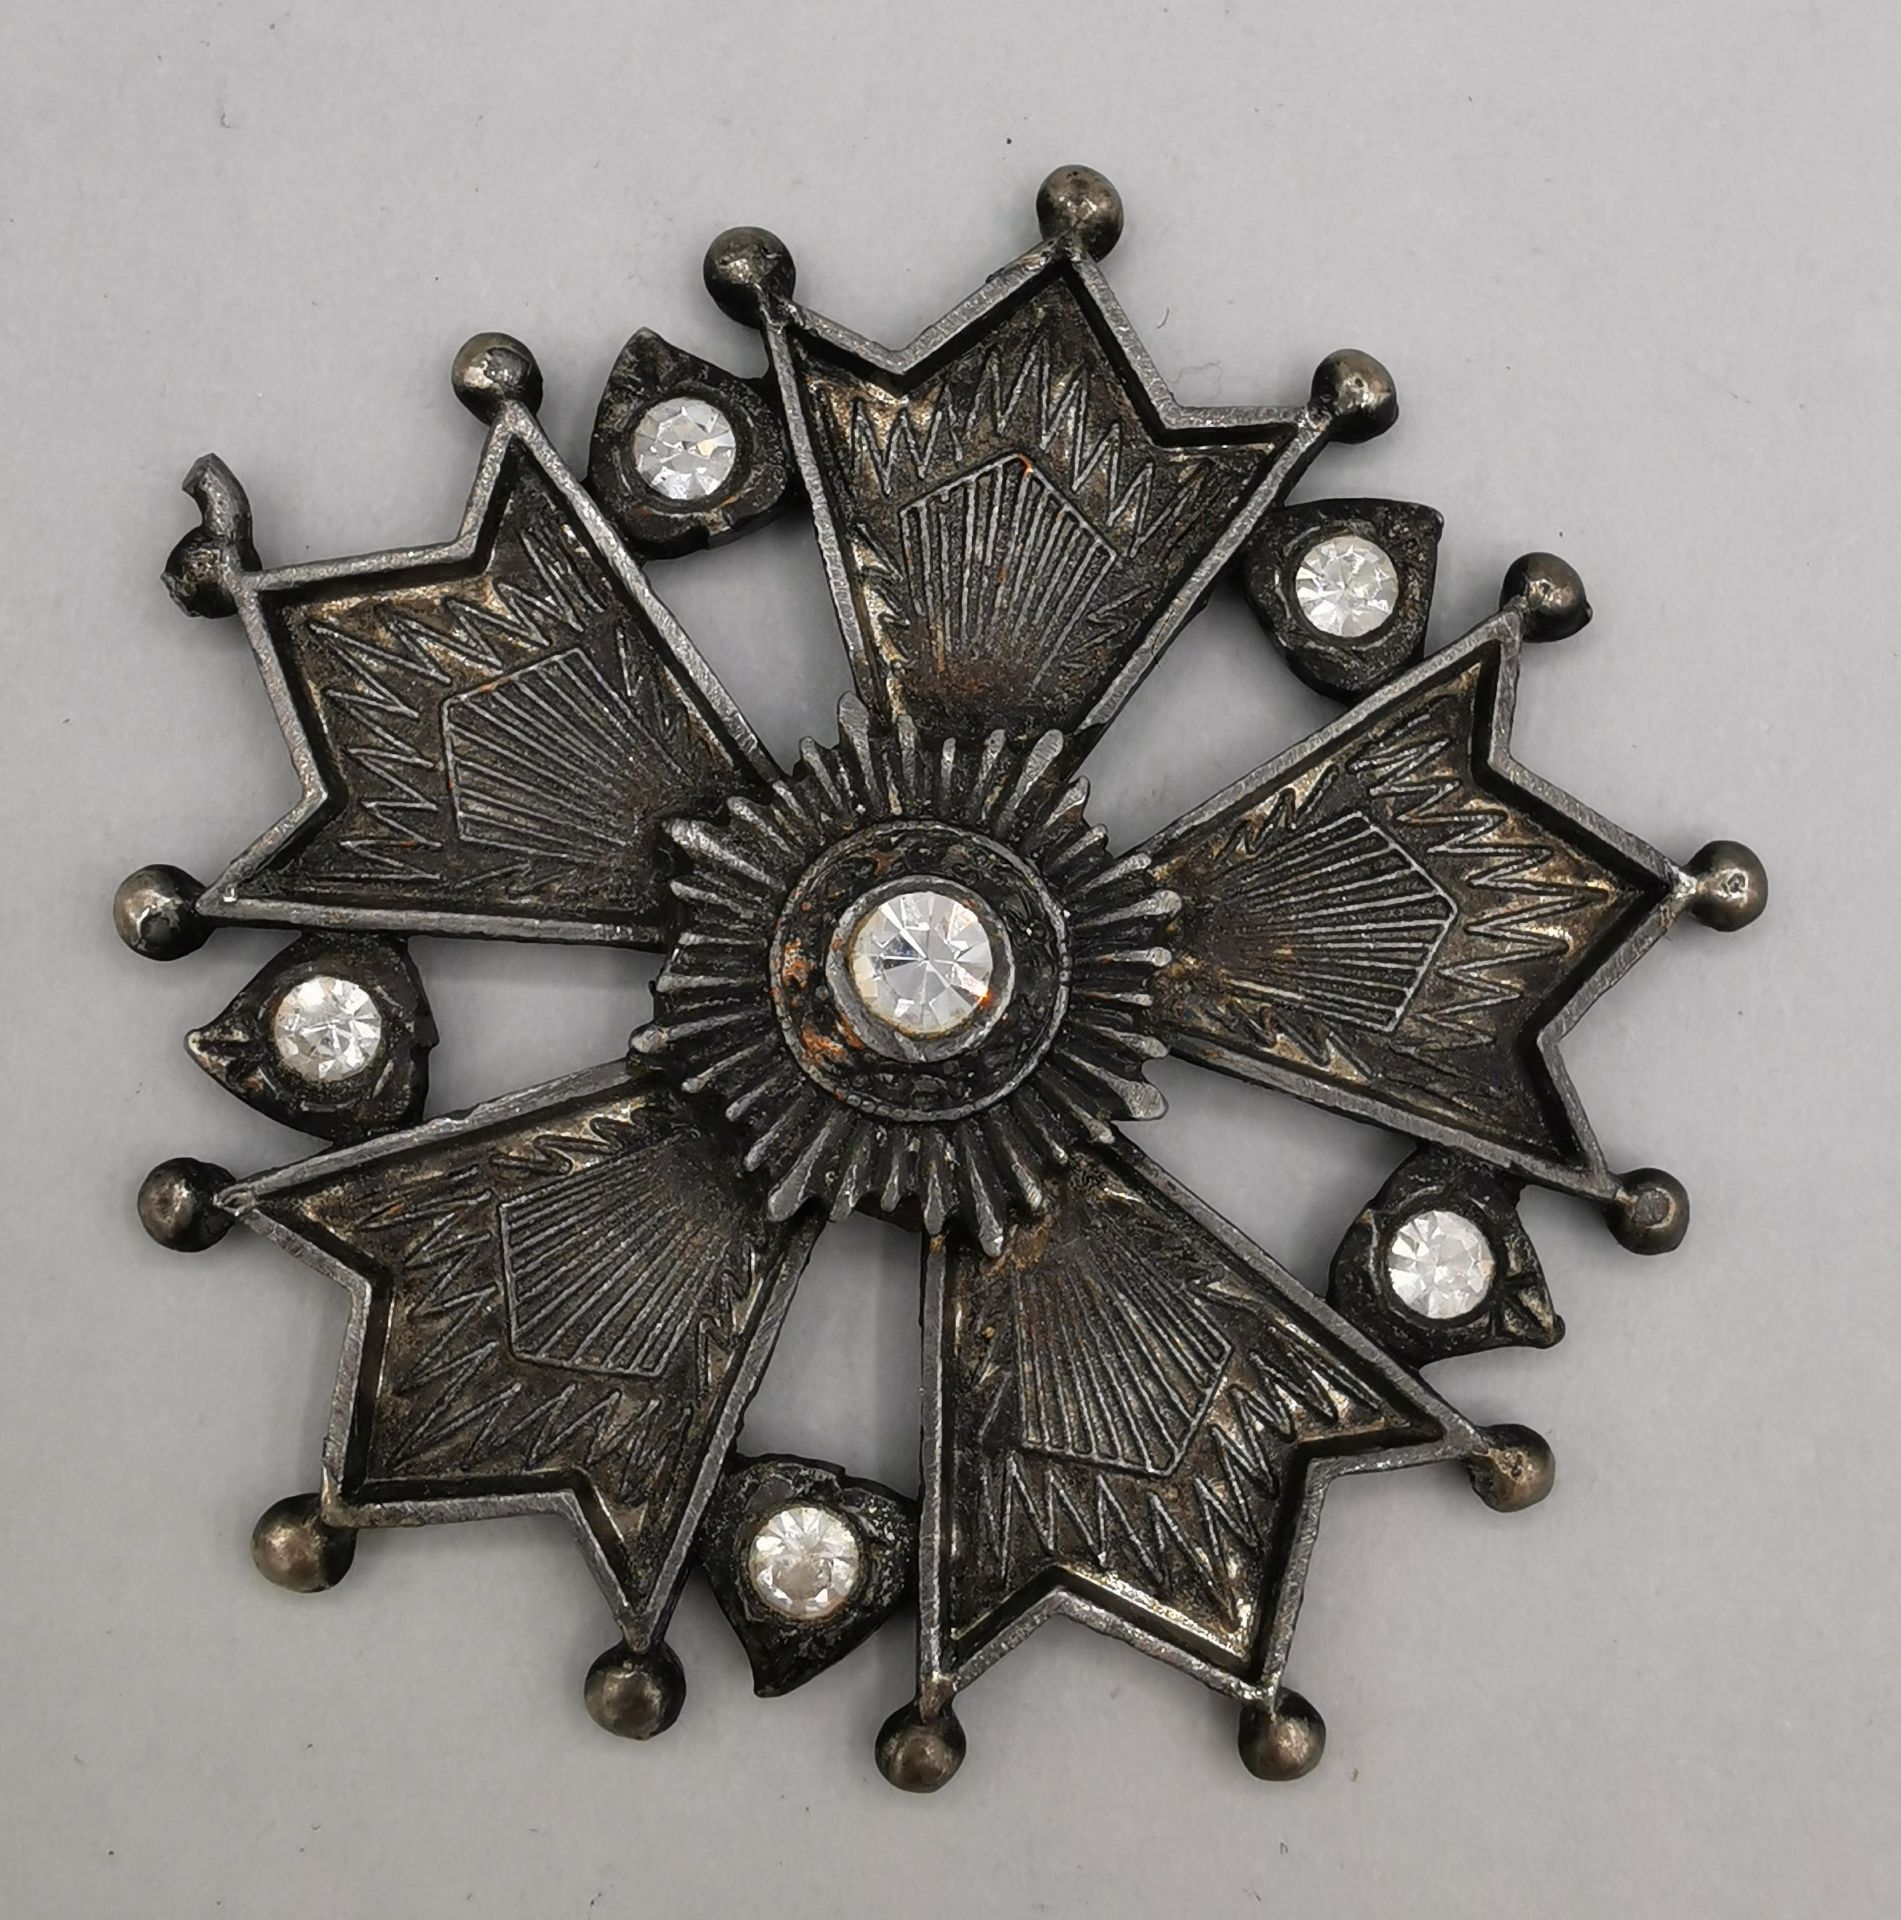 MEDAL / BADGE OF HONOUR - STAR-SHAPED MEDAL WITH STONE TRIM - Image 2 of 3